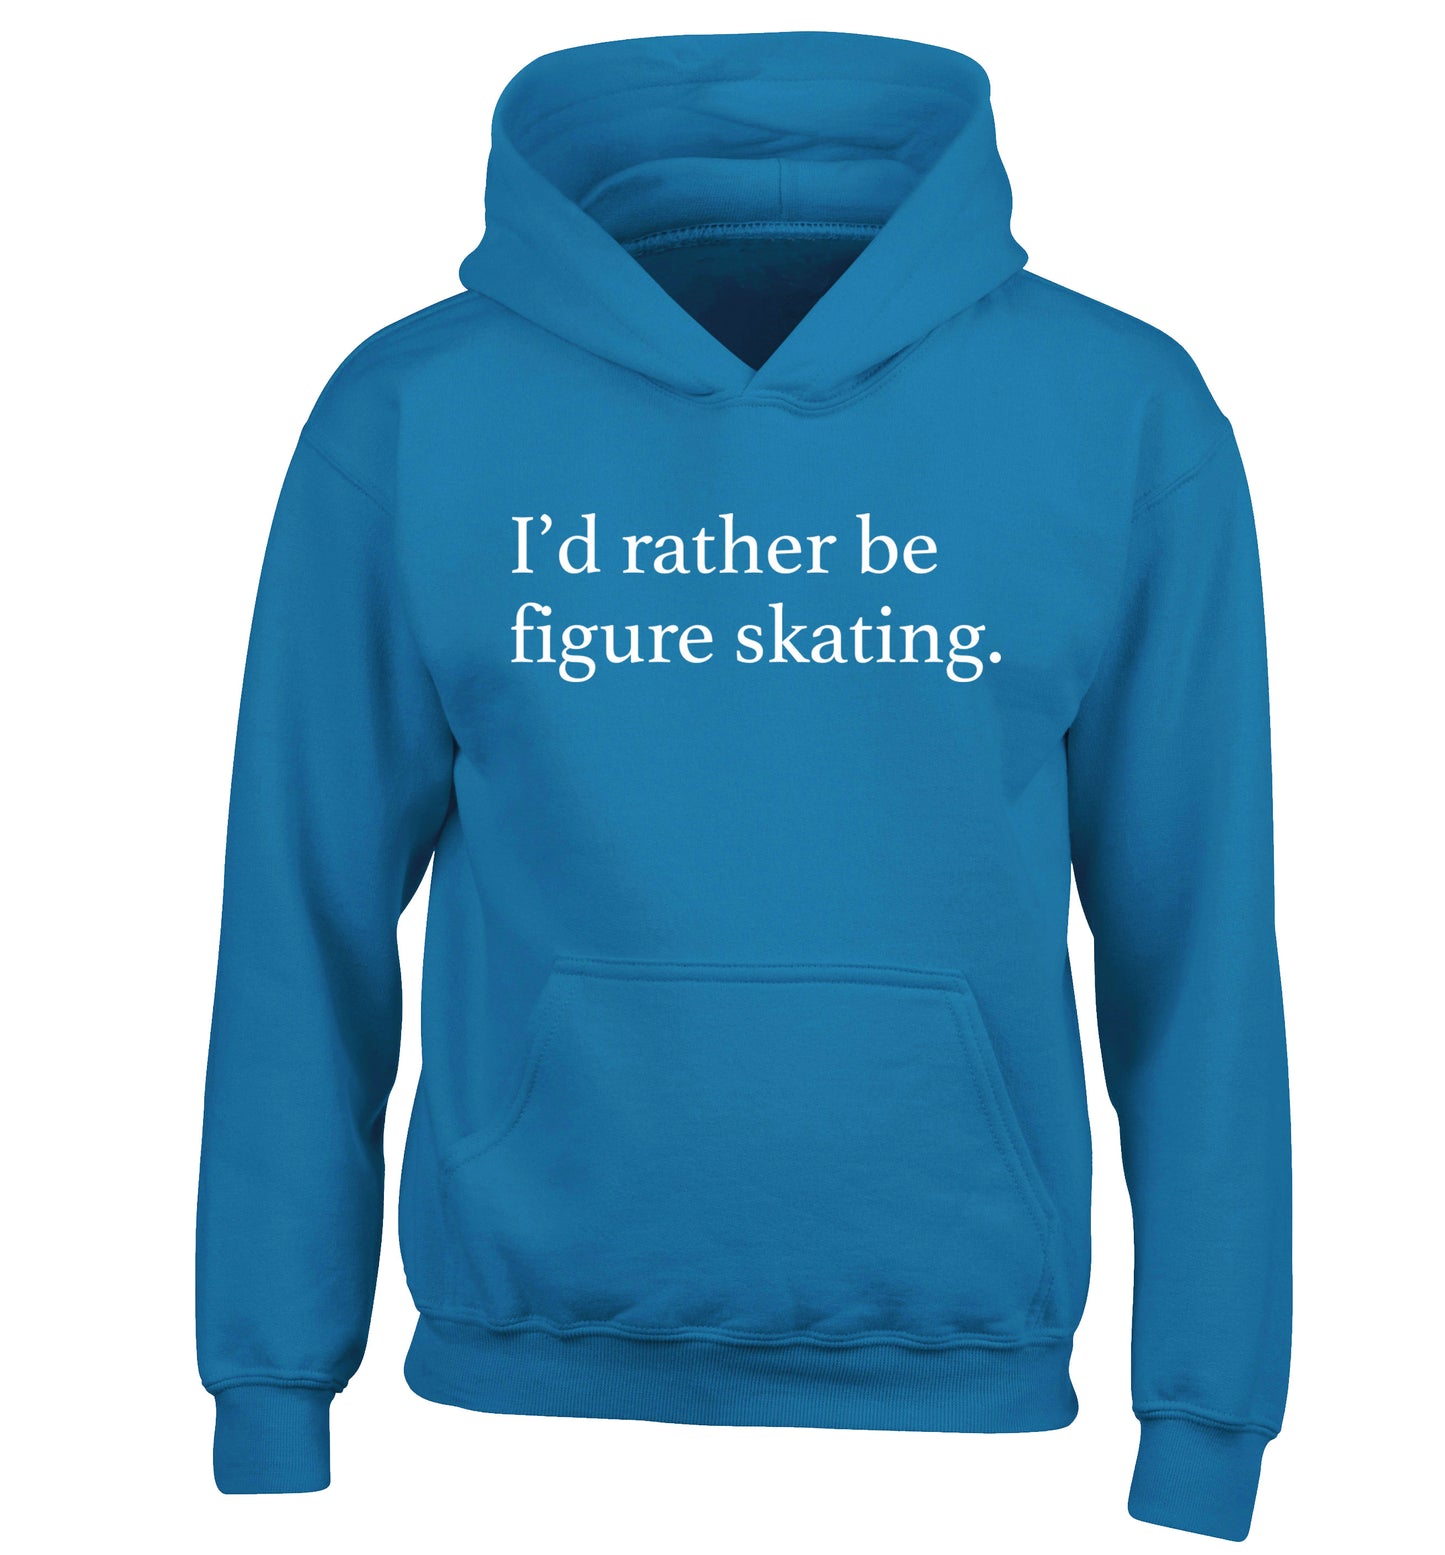 I'd rather be figure skating children's blue hoodie 12-14 Years